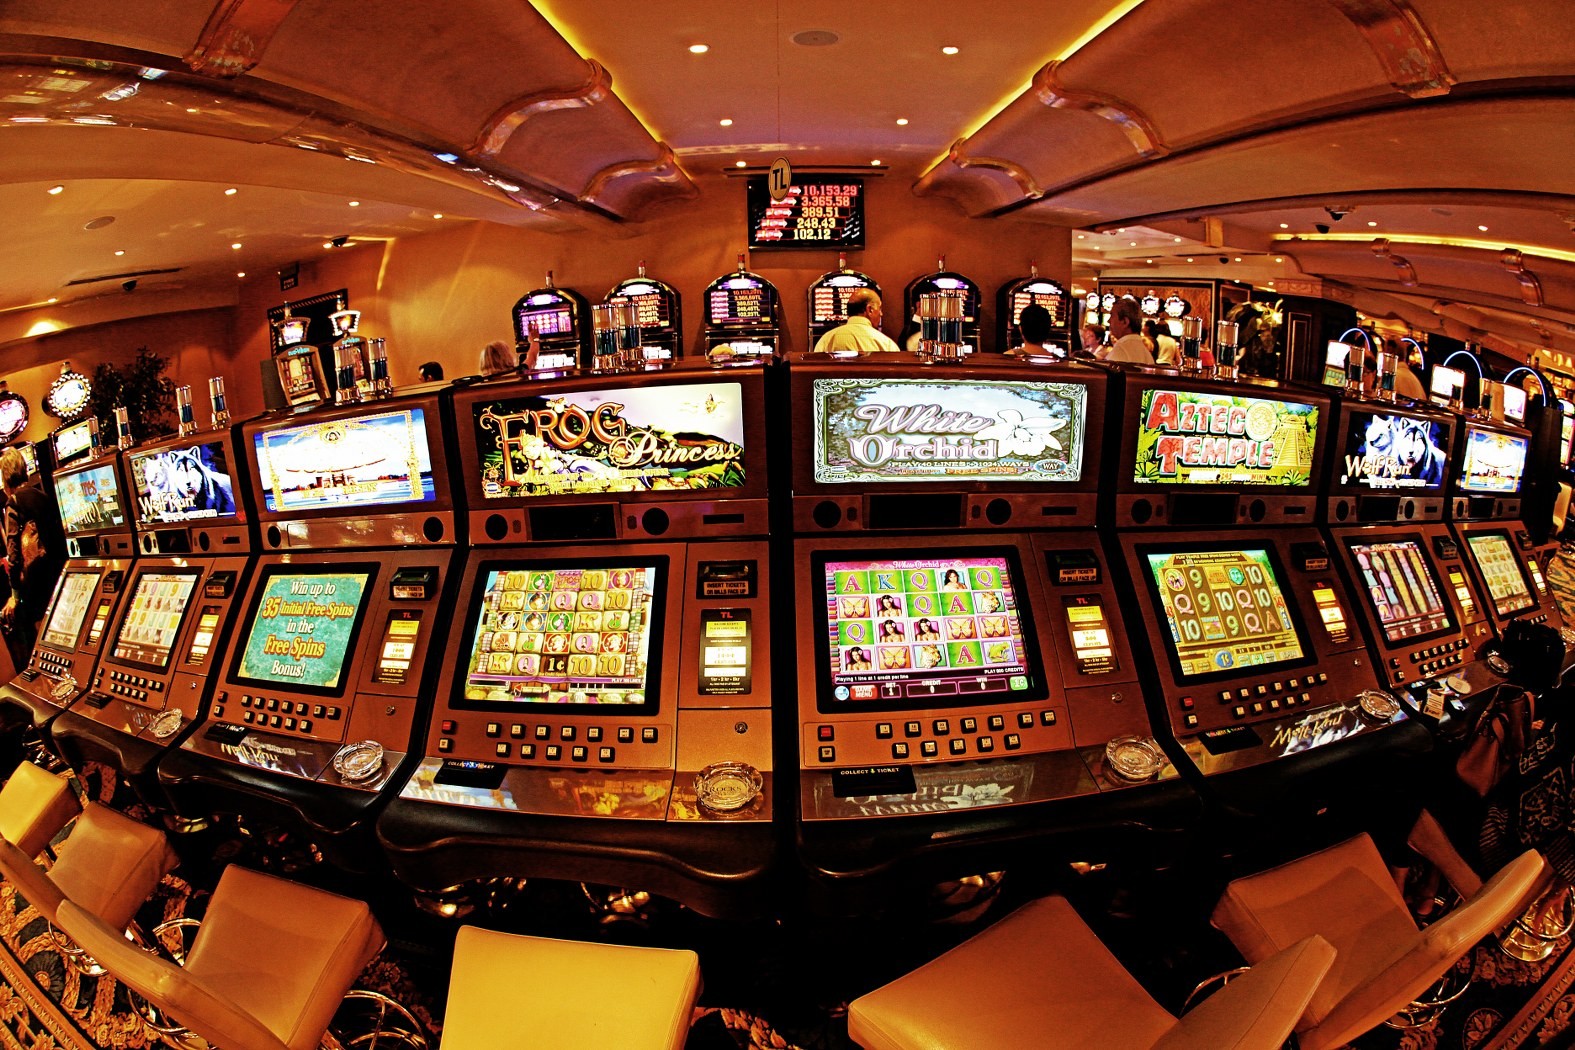 How to make a comparison amongst online casinos available?